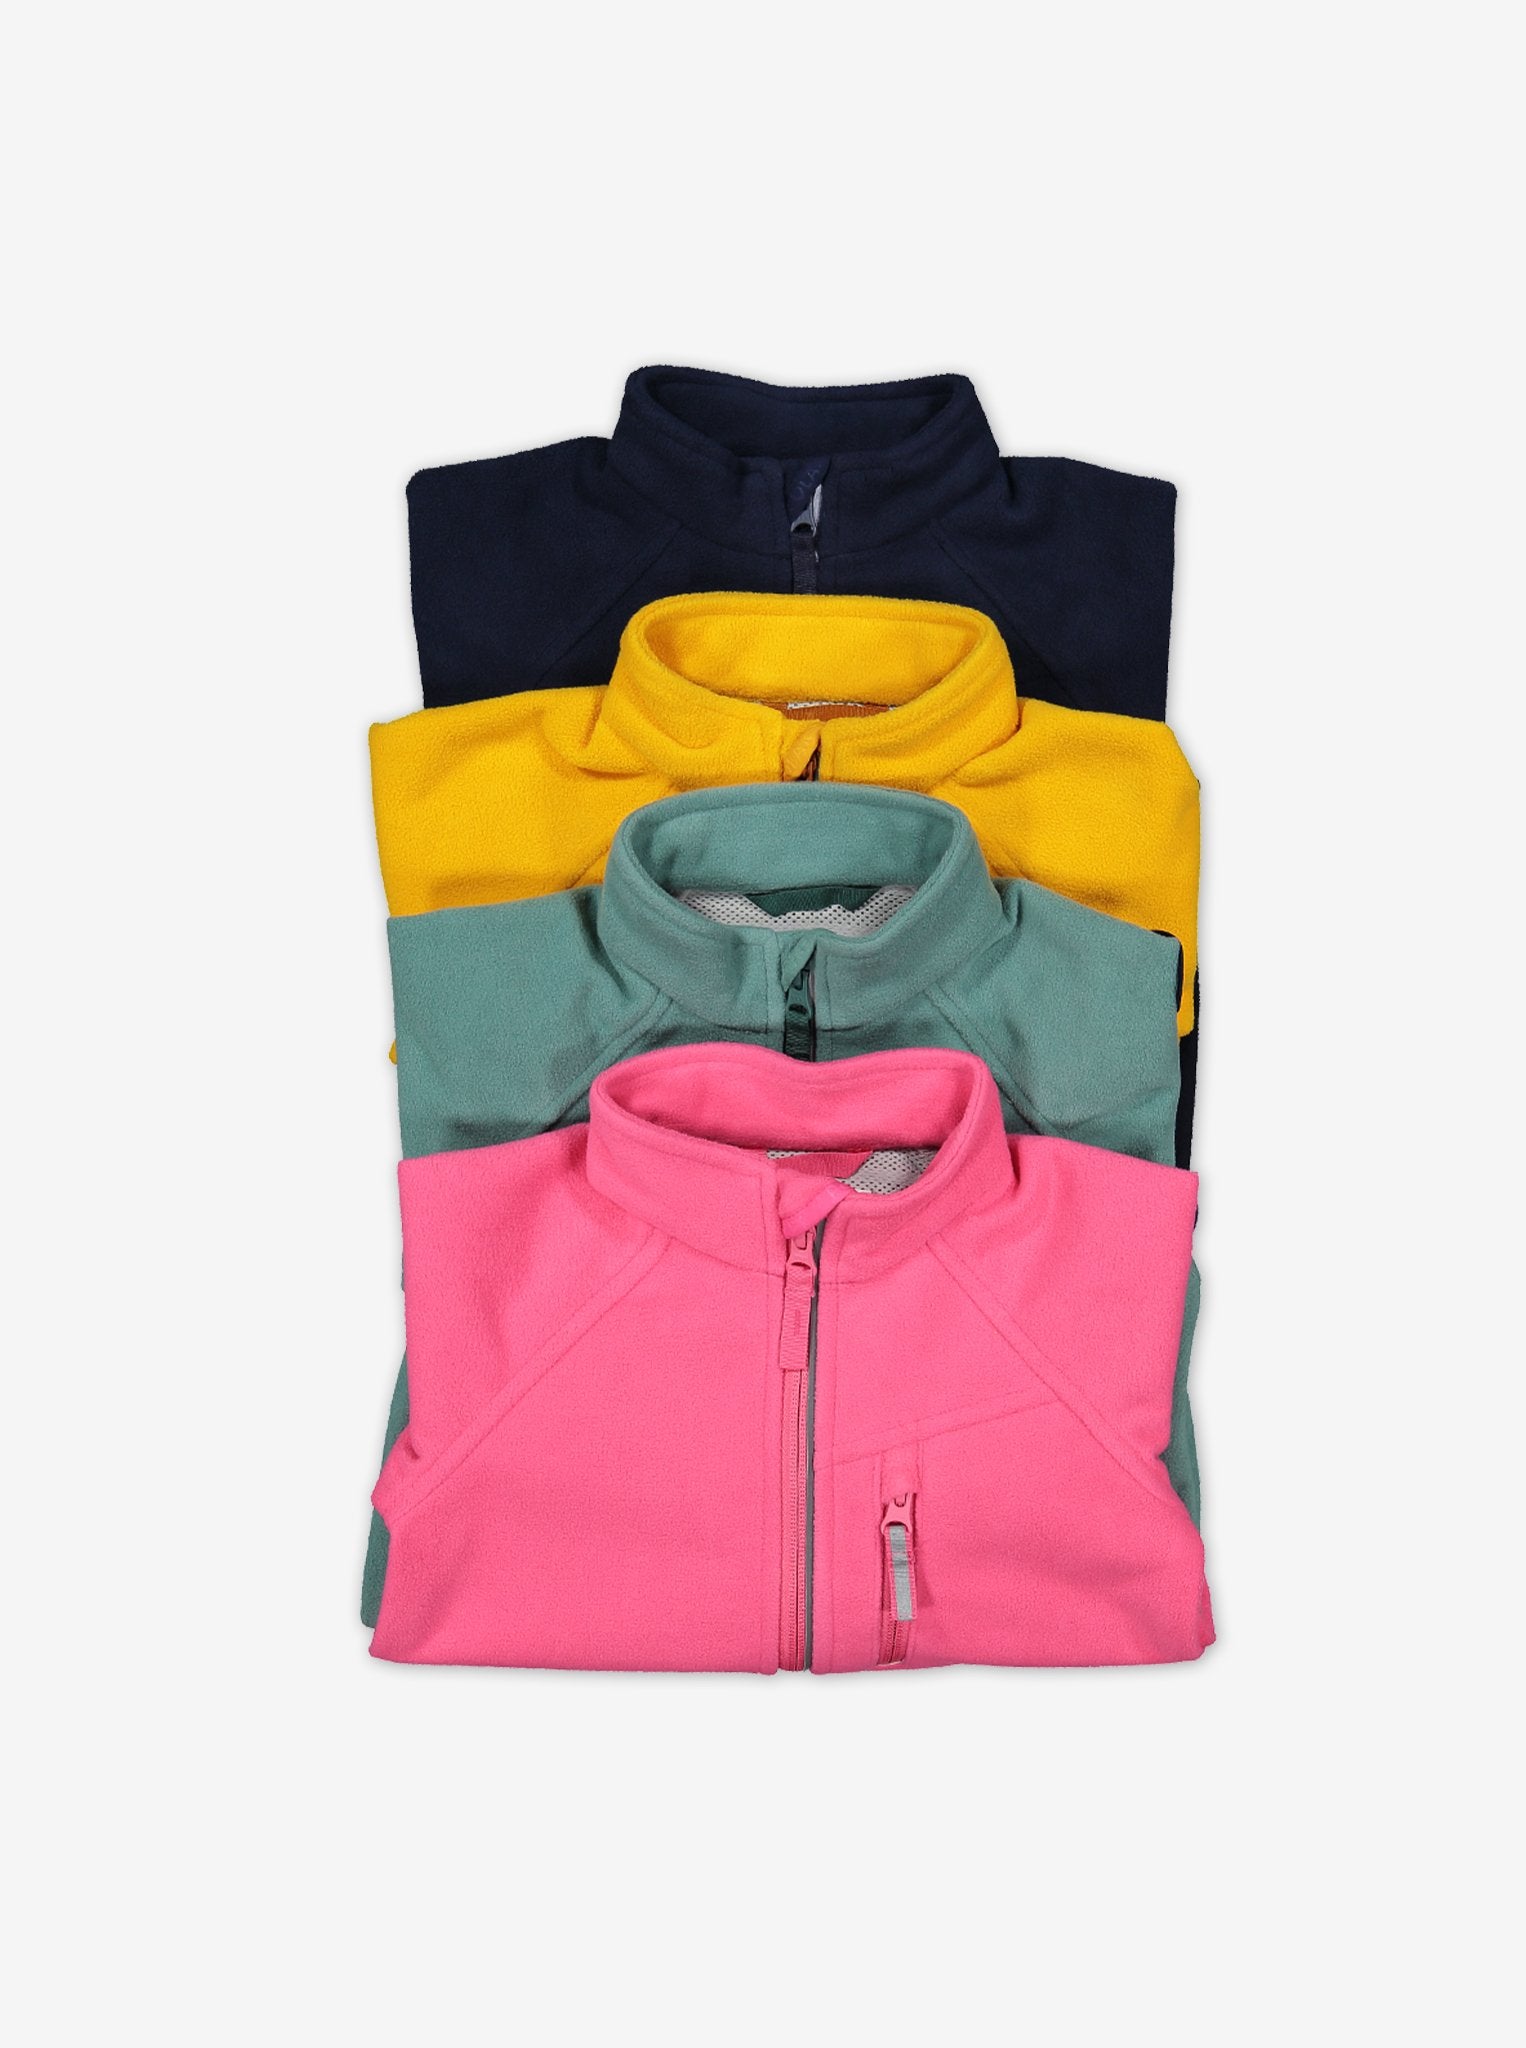 Set of 4 kids waterproof fleece jacket in navy, yellow, green, and pink, made of breathable and flexible material.